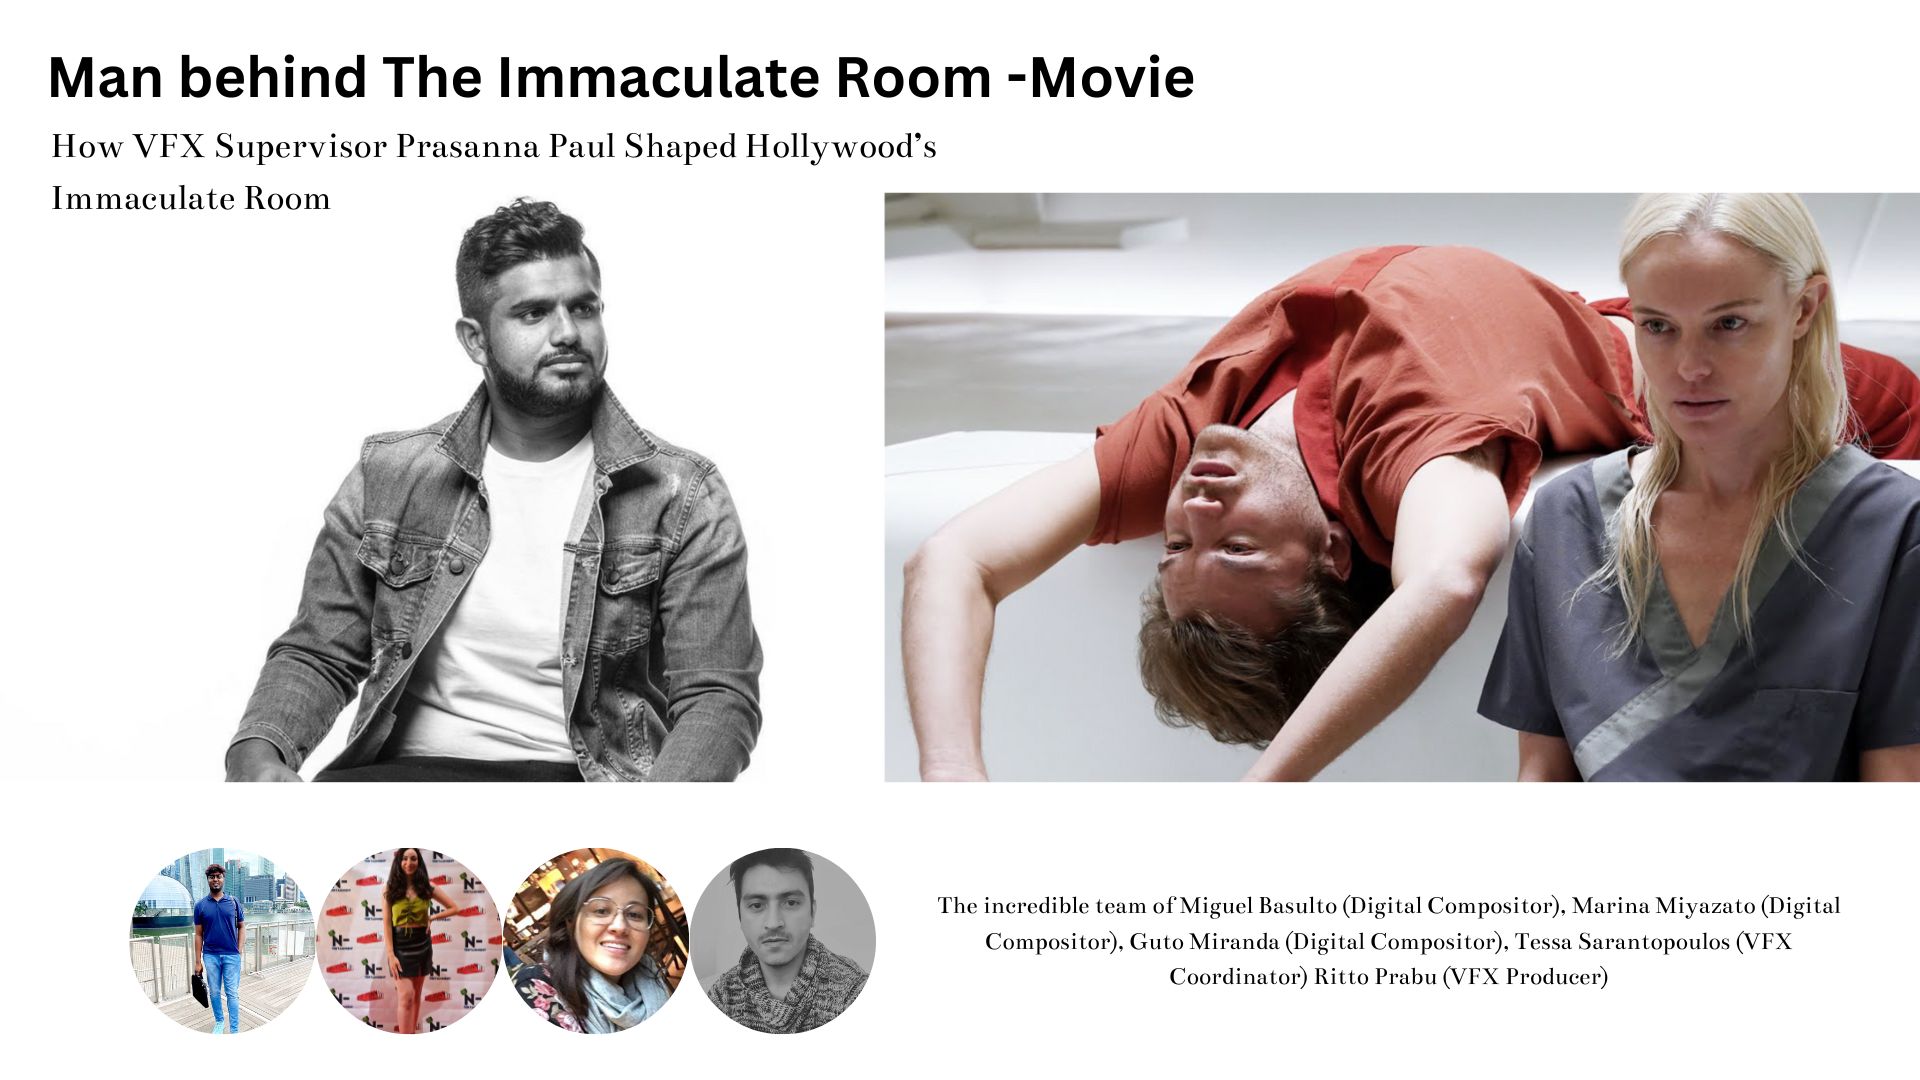 Man behind The Immaculate Room- Movie